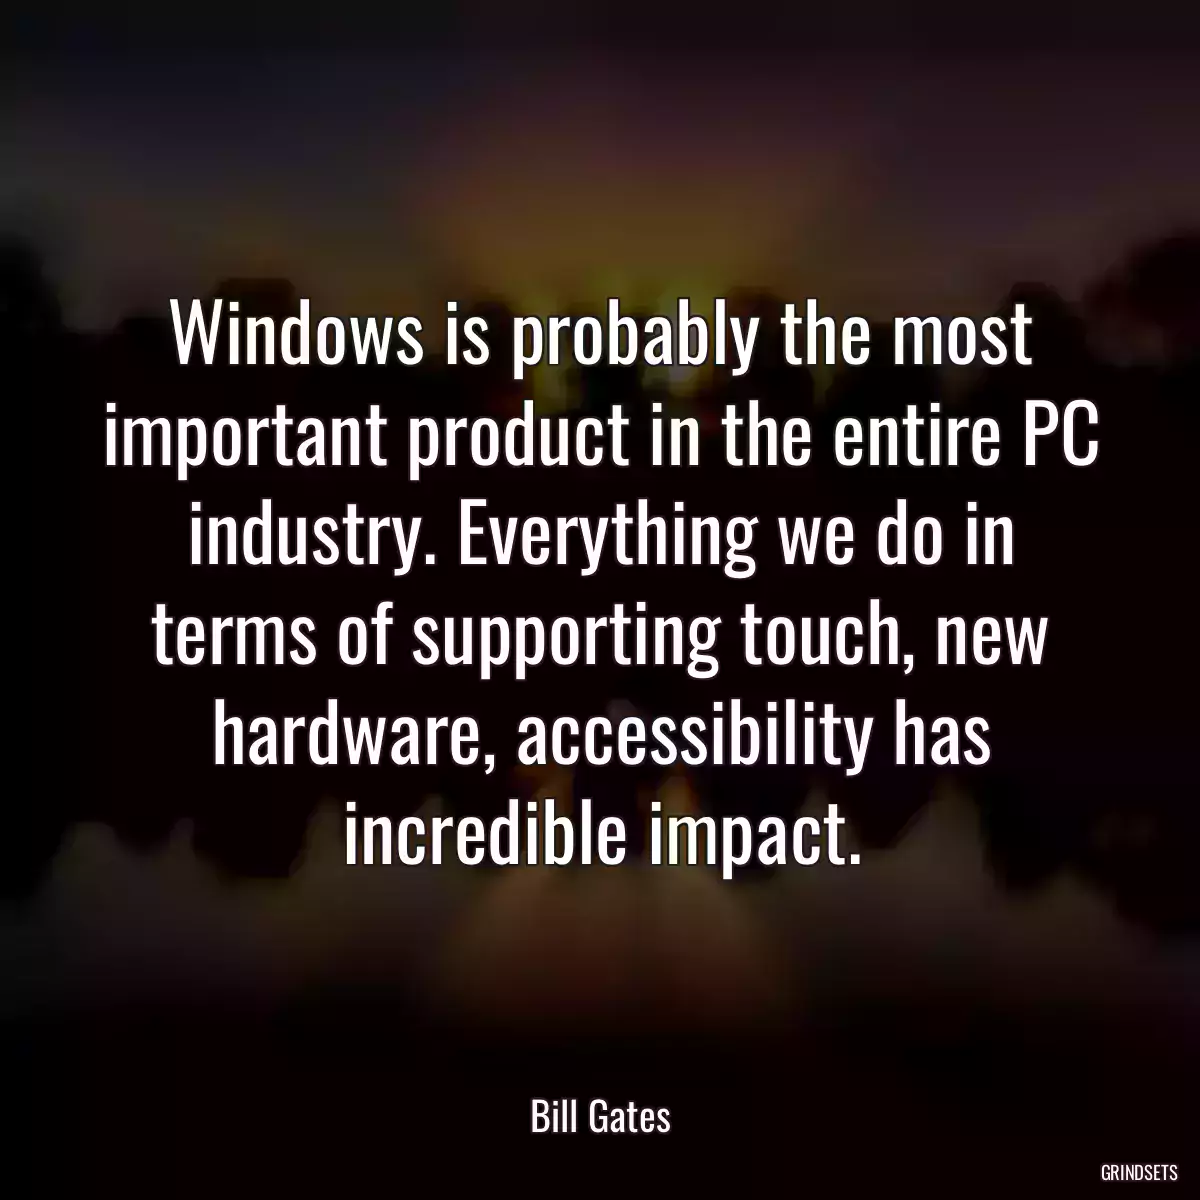 Windows is probably the most important product in the entire PC industry. Everything we do in terms of supporting touch, new hardware, accessibility has incredible impact.